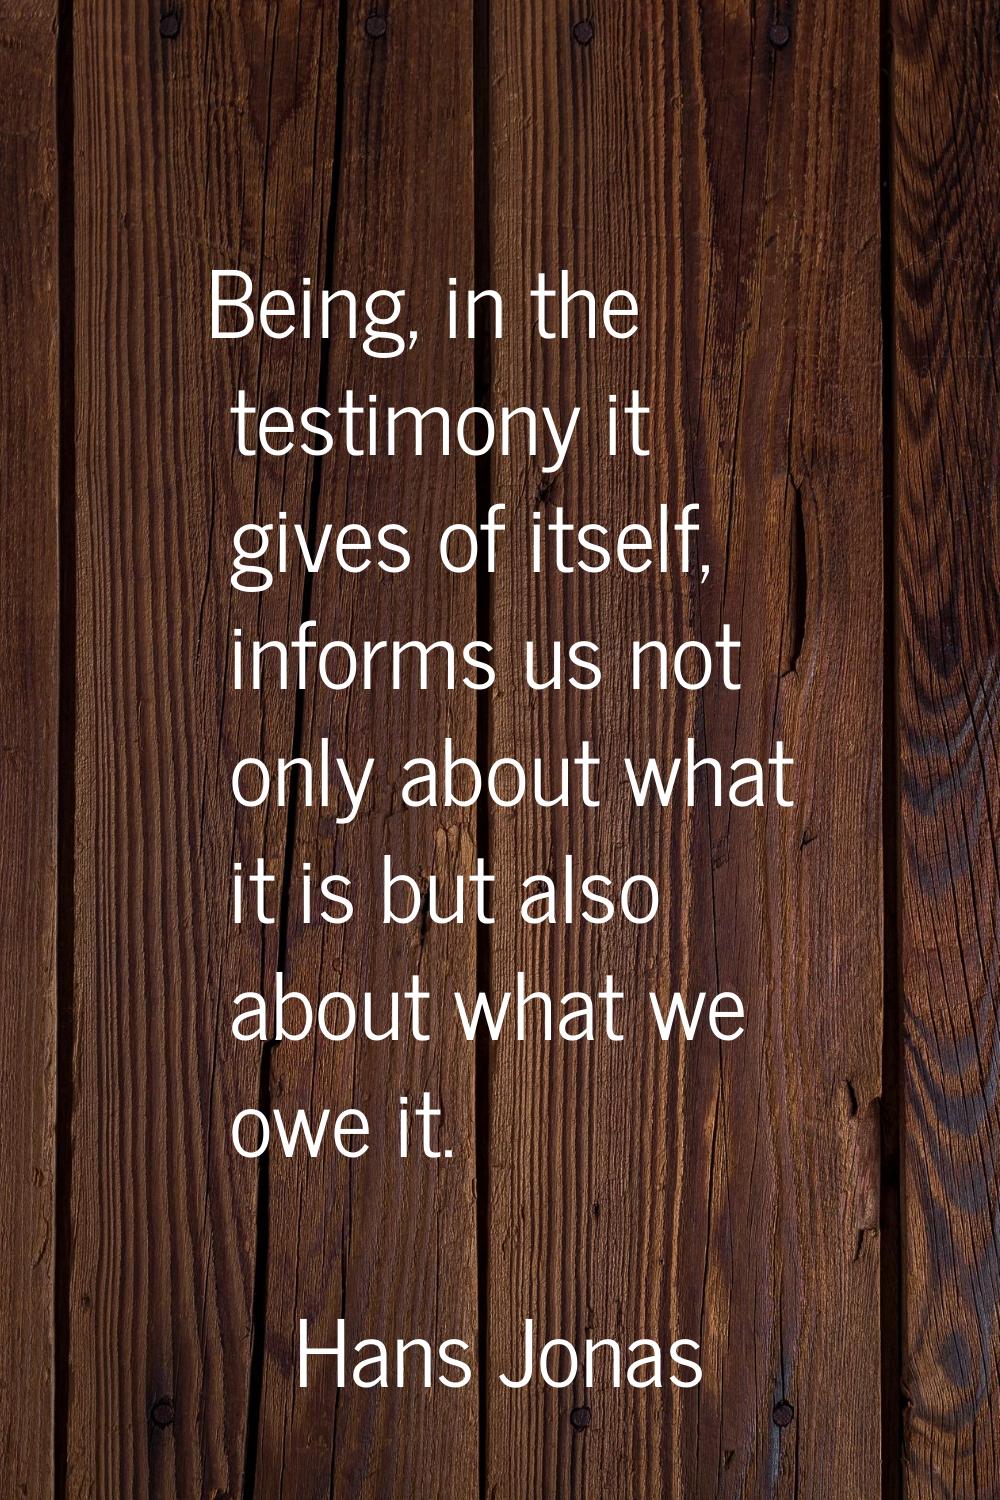 Being, in the testimony it gives of itself, informs us not only about what it is but also about wha